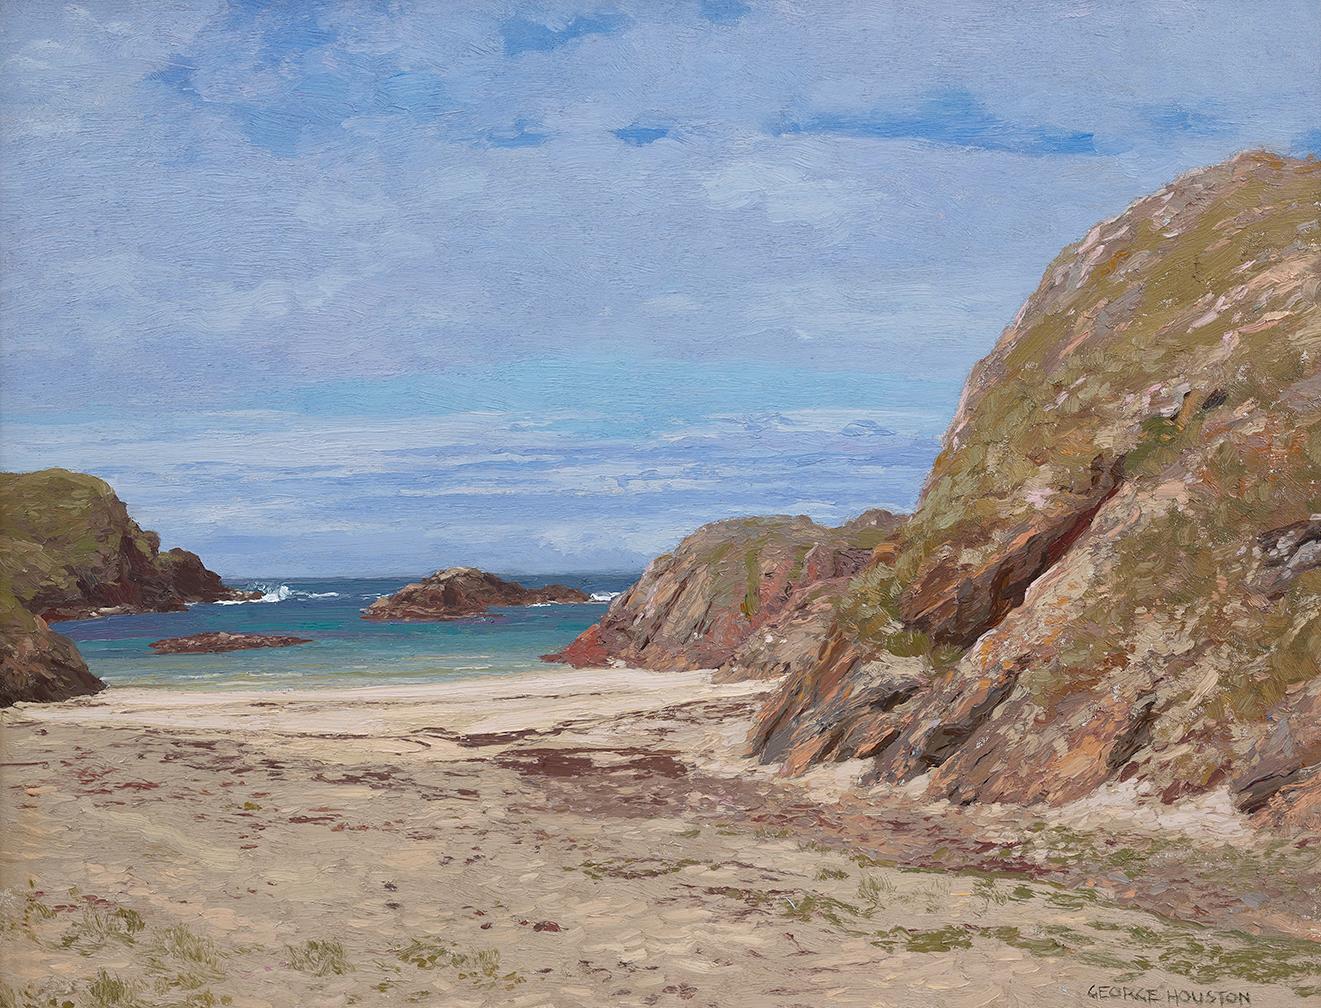 'The West Coast of Scotland' 20th Century landscape painting of sea, rocks, beach - Painting by George Houston